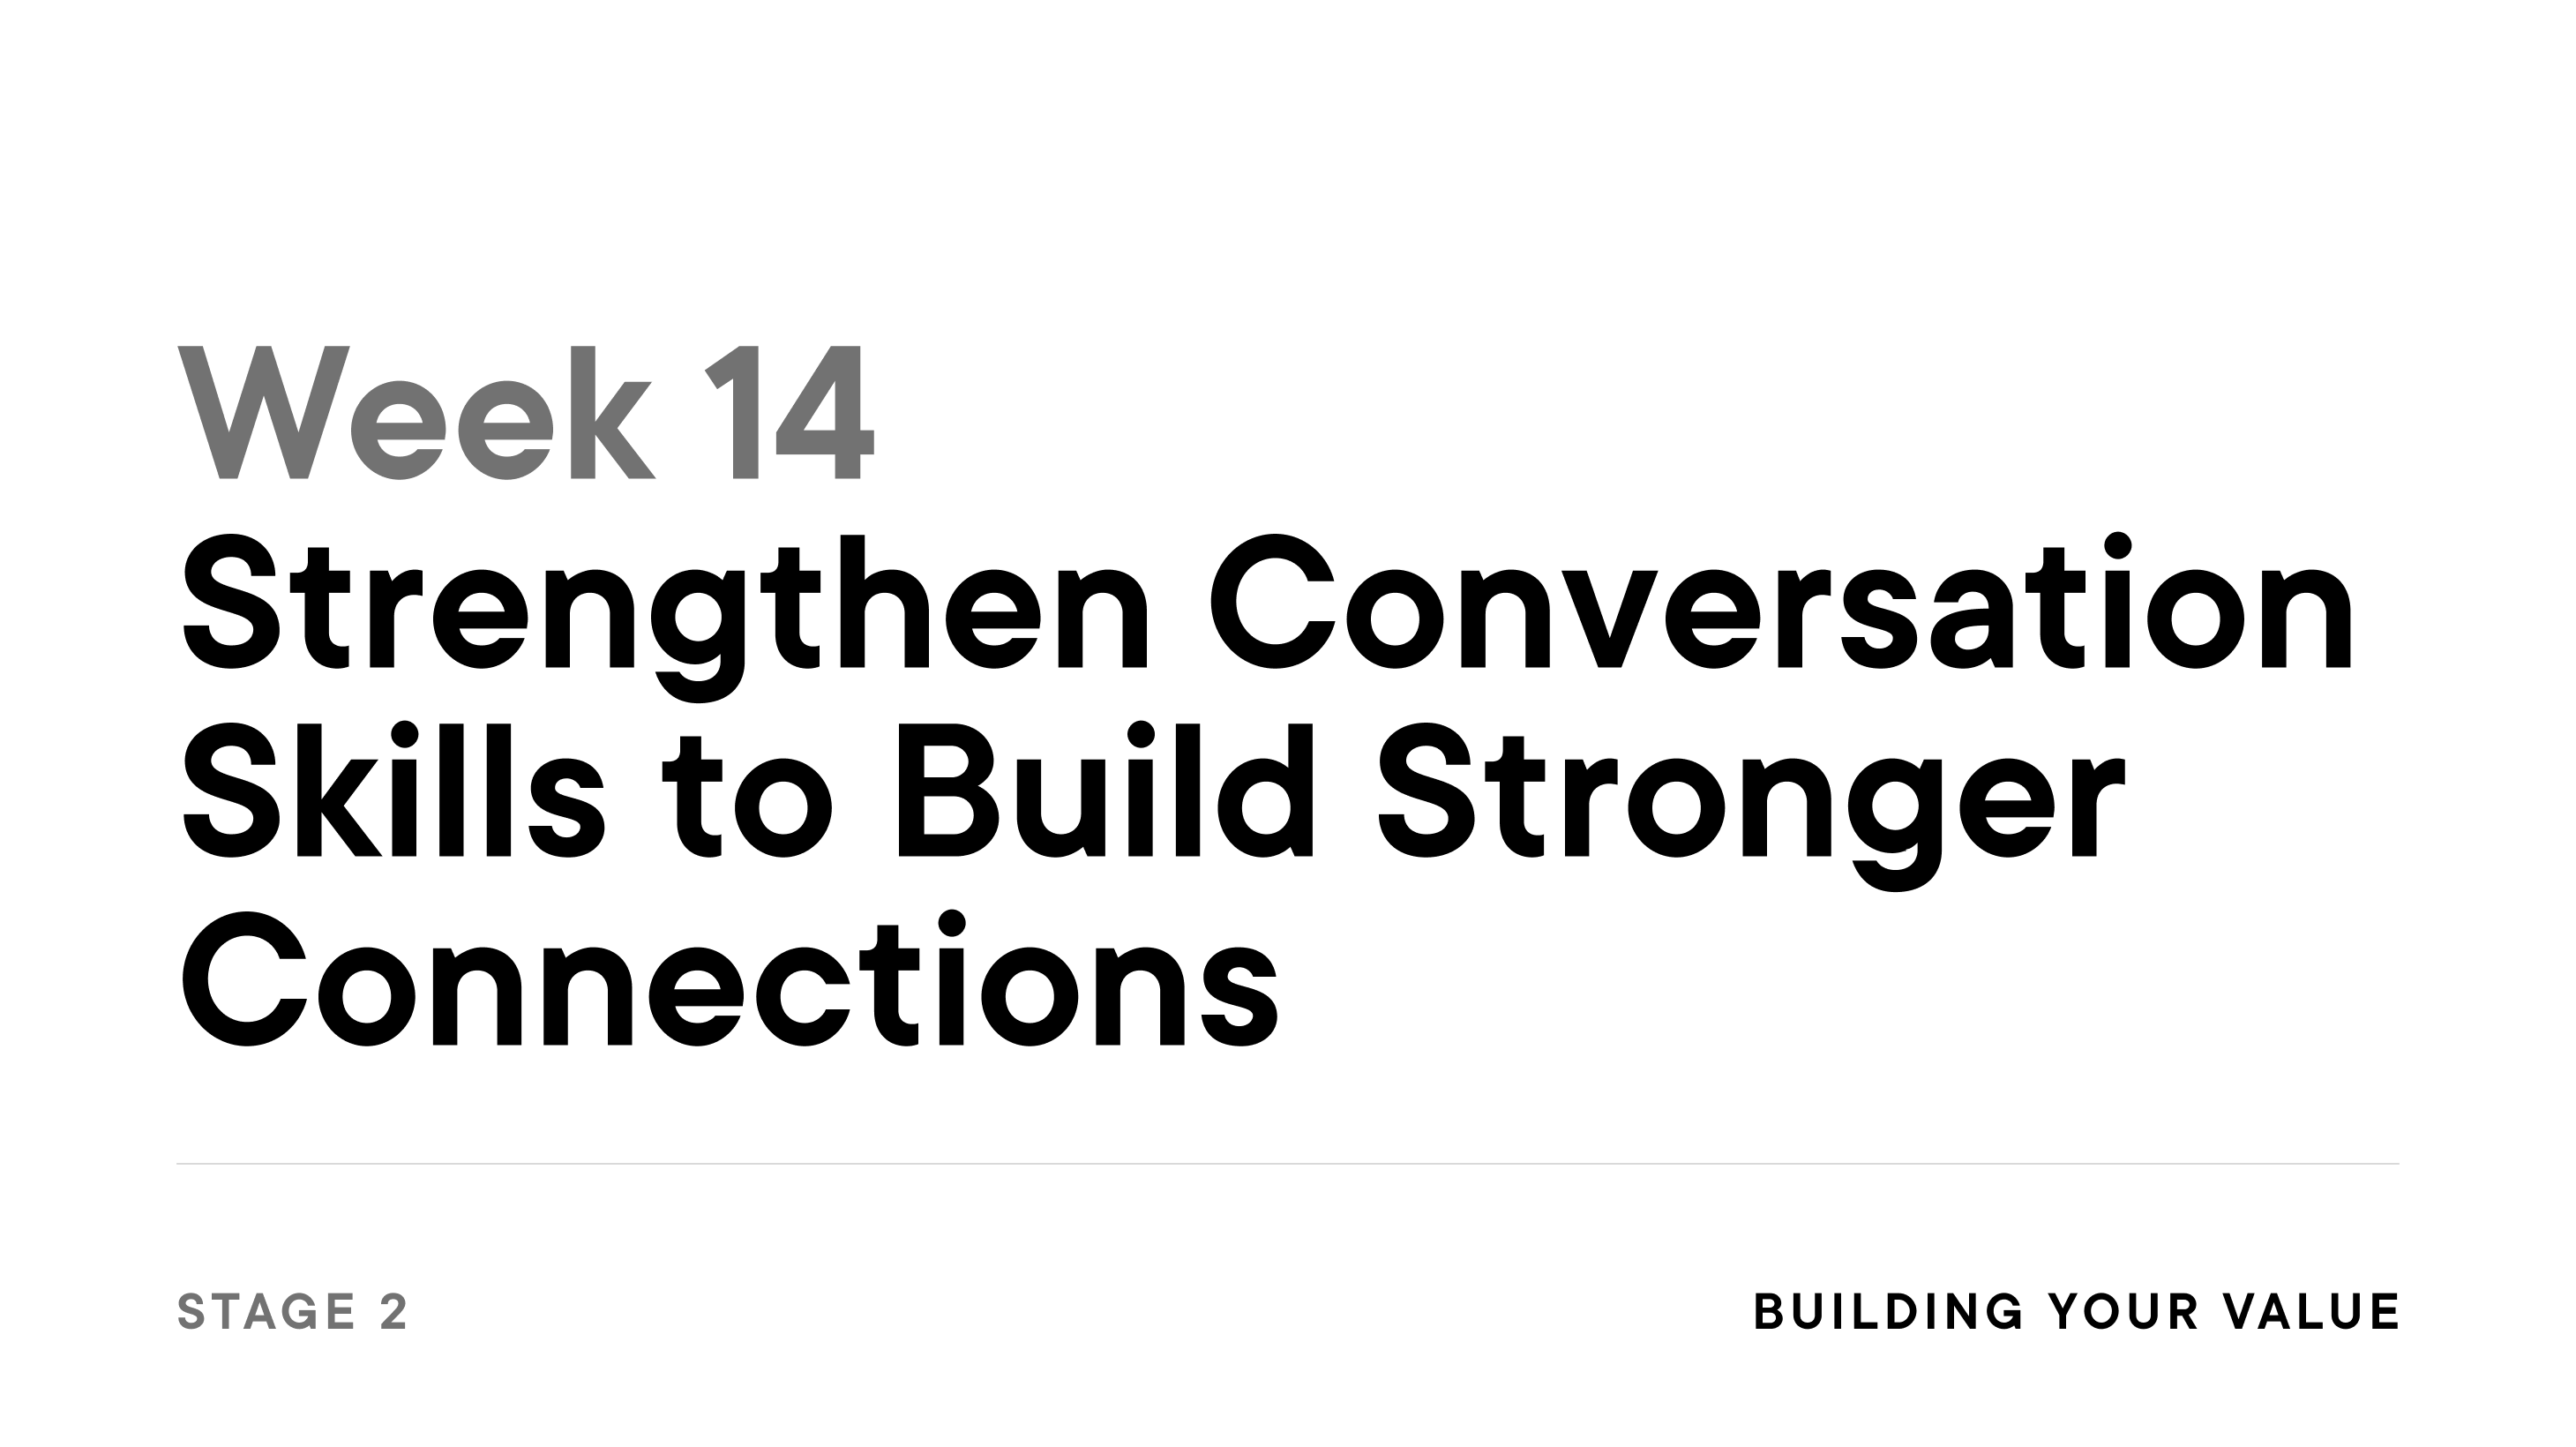 Week 14: Strengthen Conversation Skills to Build Stronger Connections